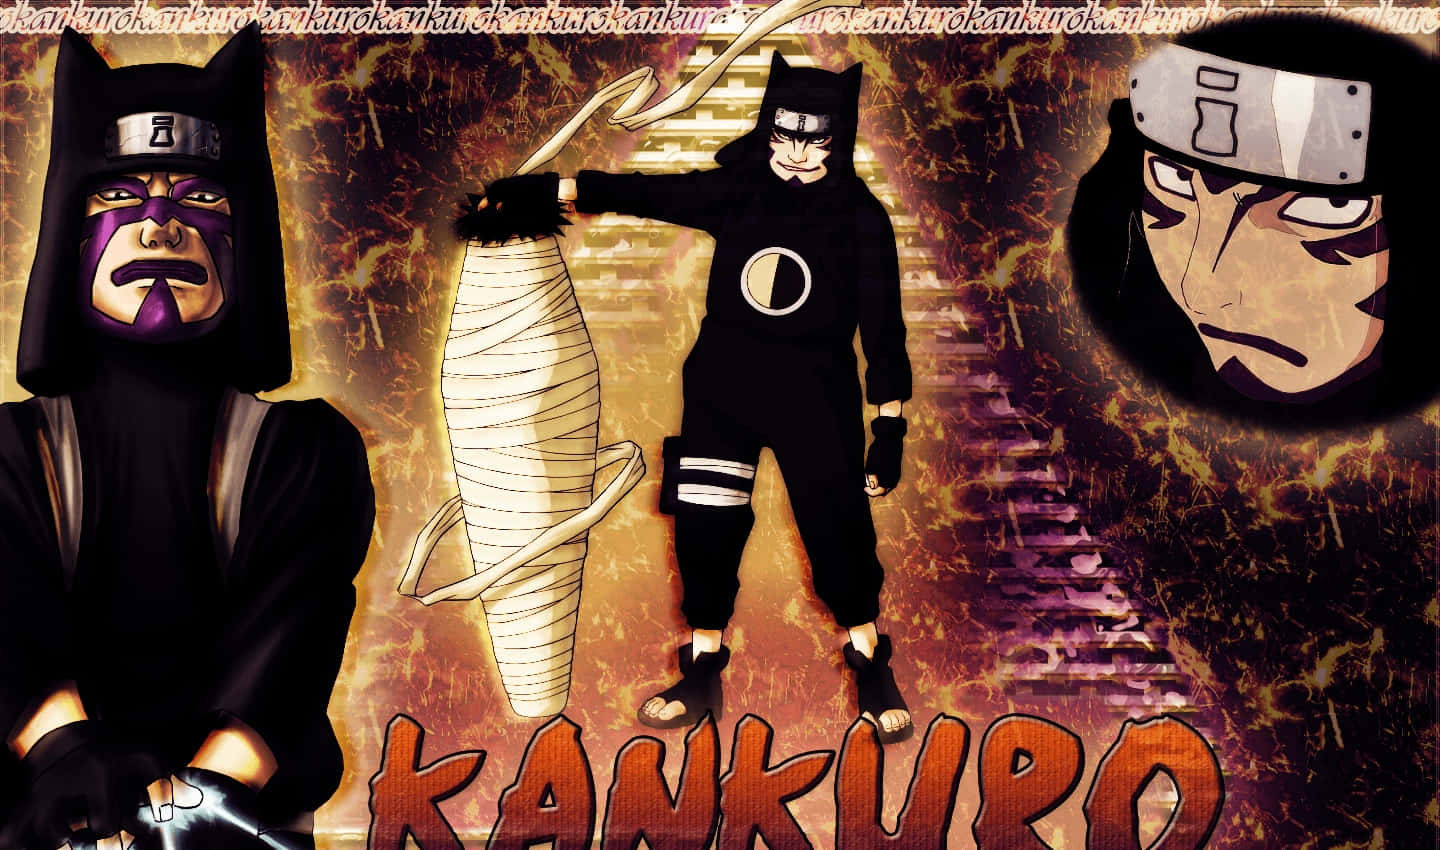 Kankuro, the master puppeteer from Naruto Wallpaper